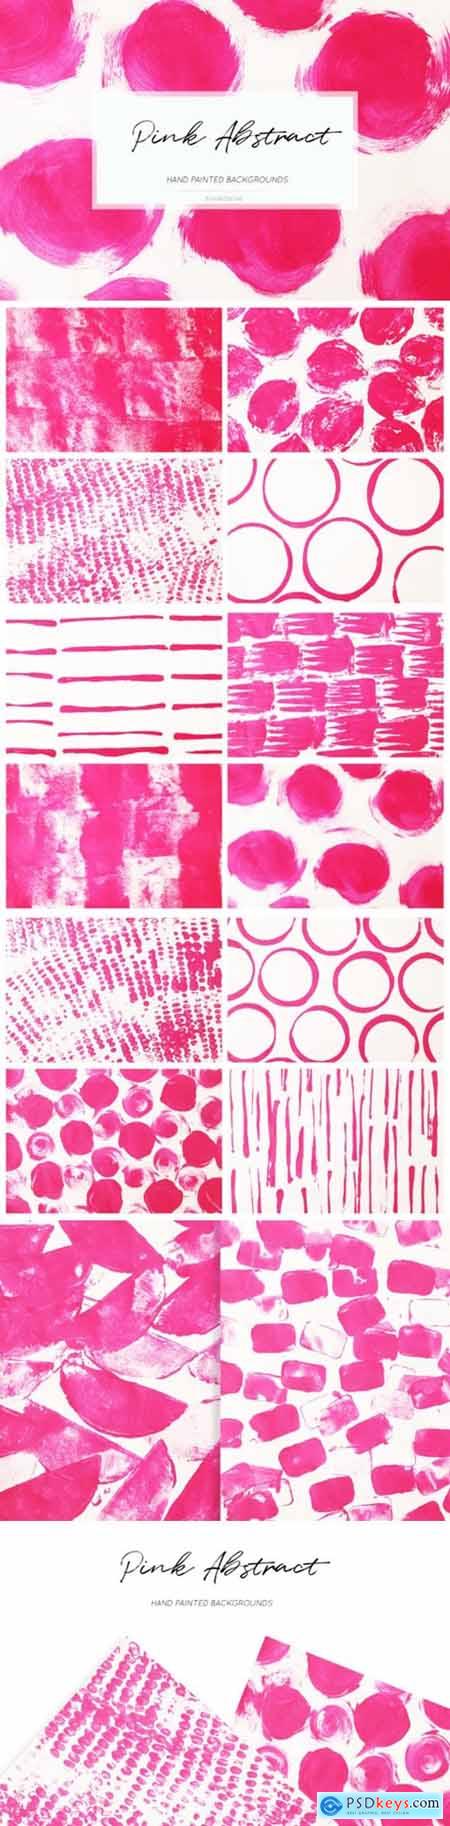 Pink Abstract Backgrounds 1663354